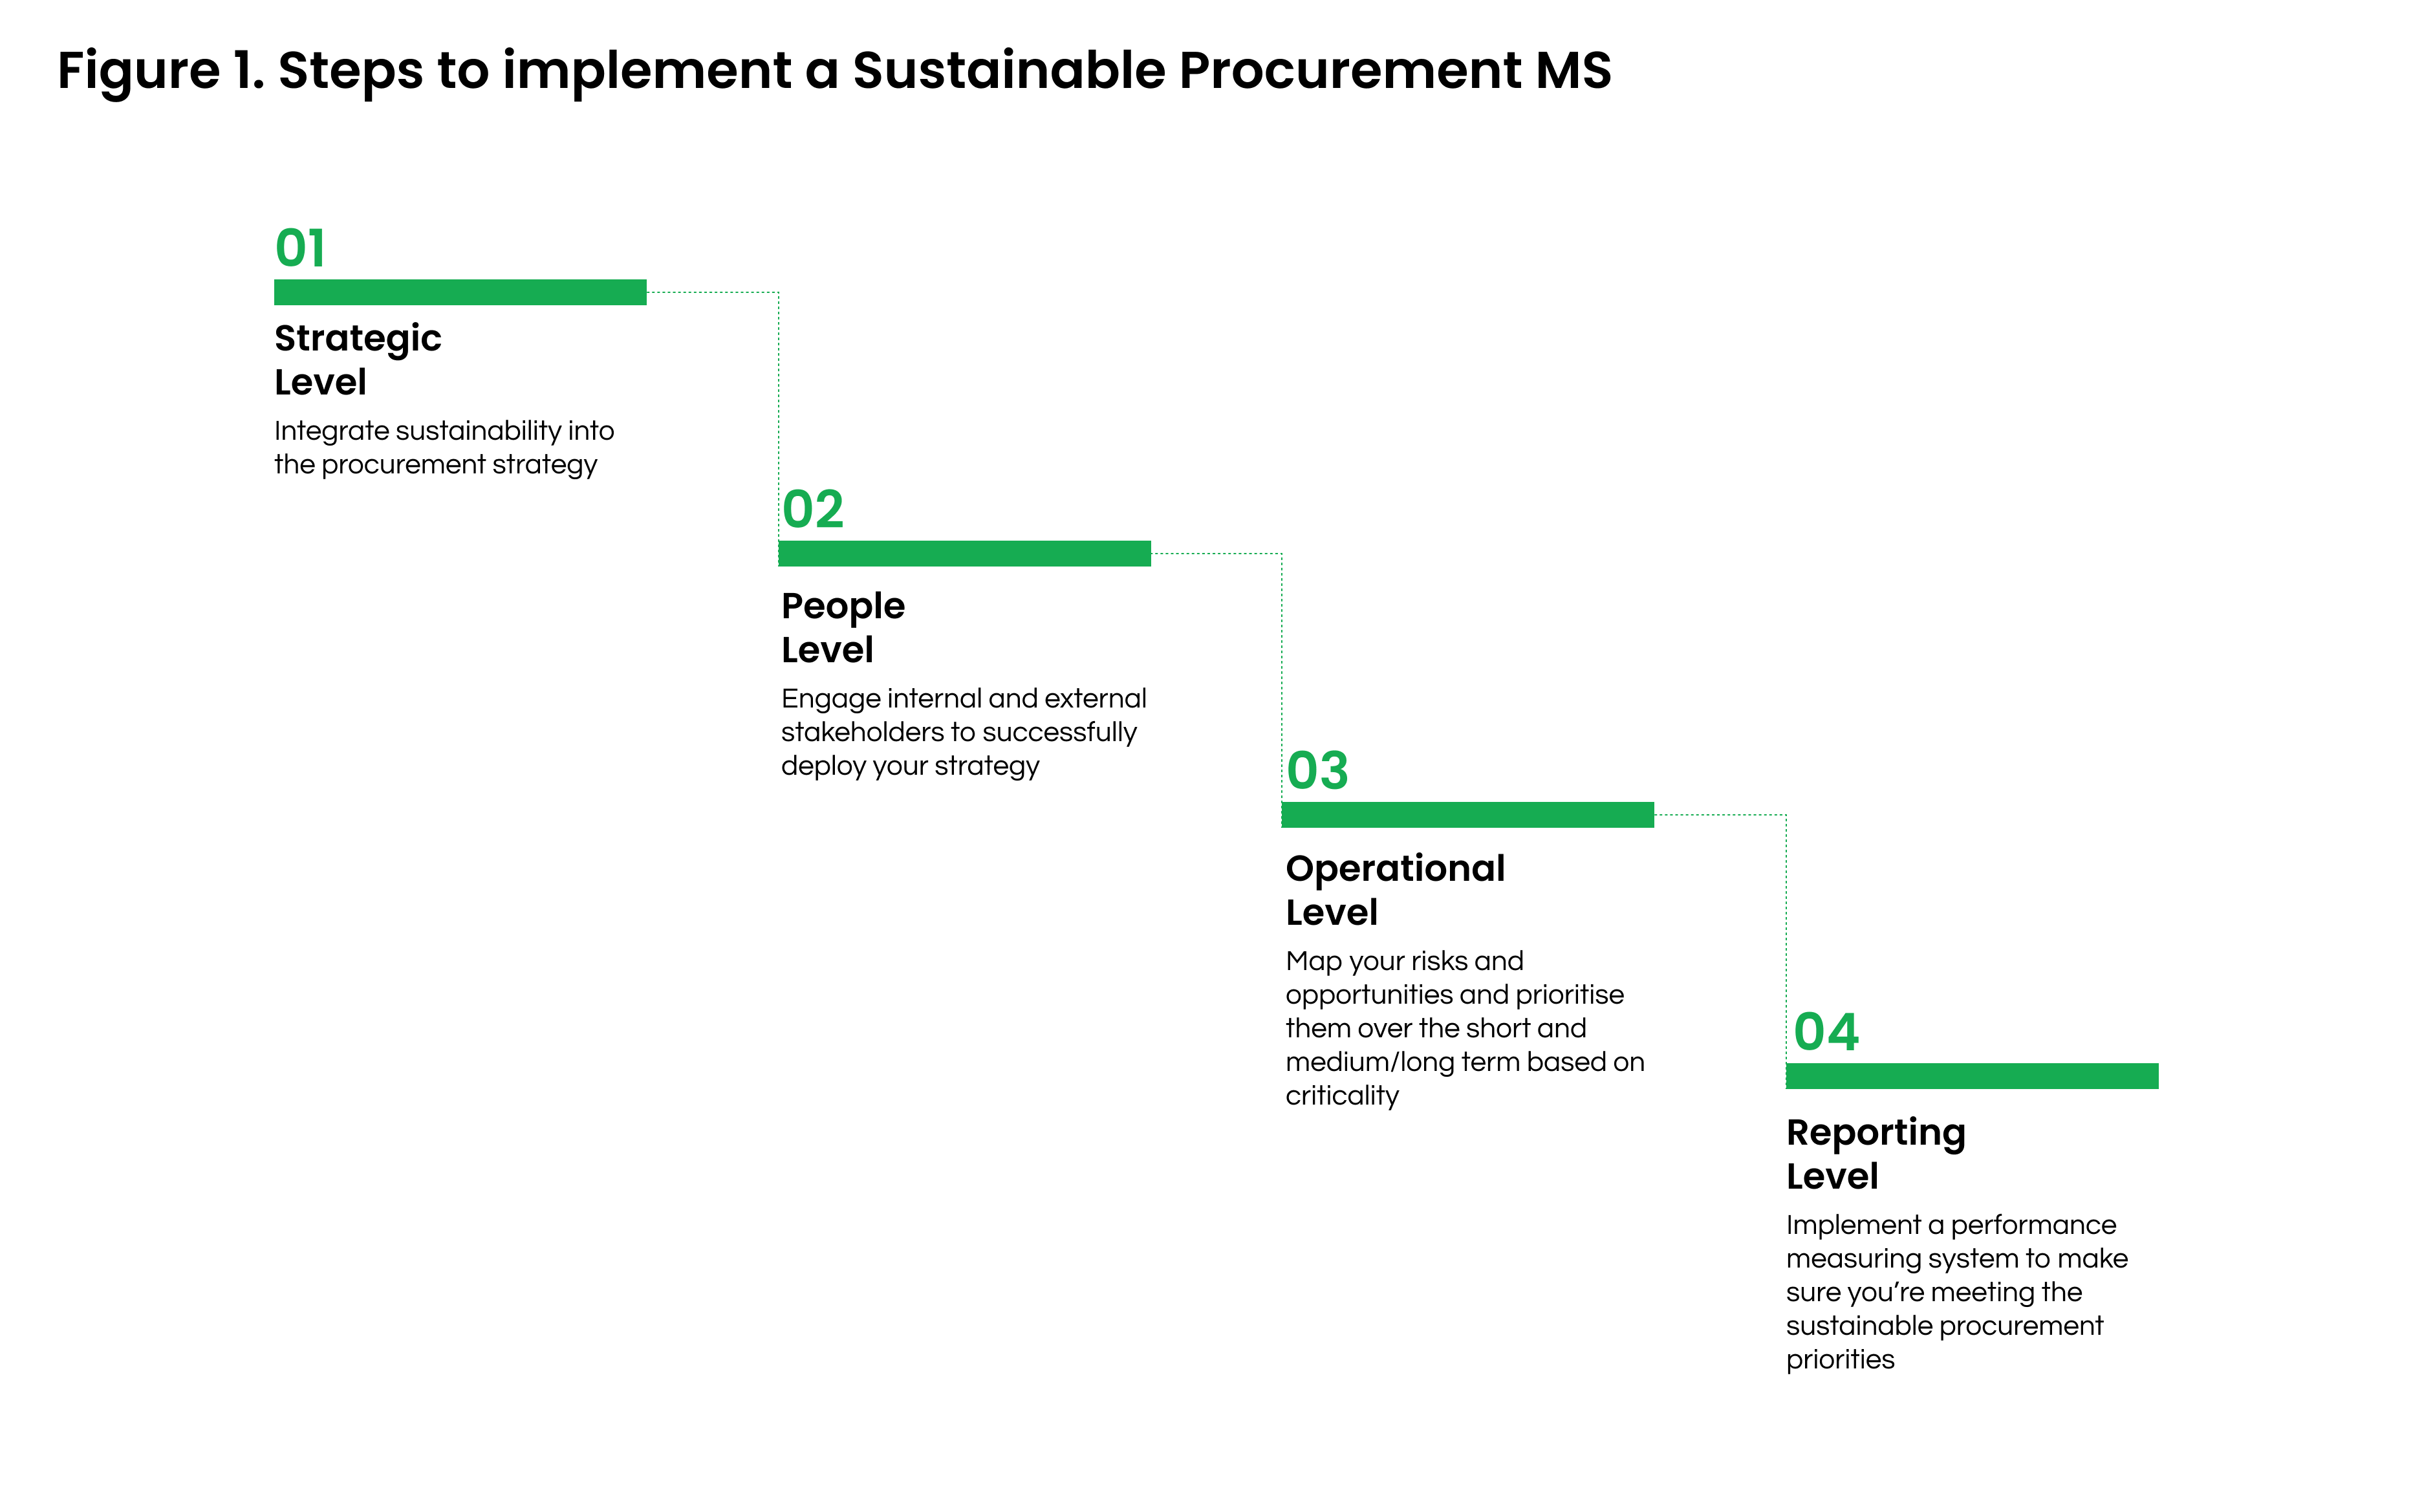 Steps to implement a sustainable procurement management system